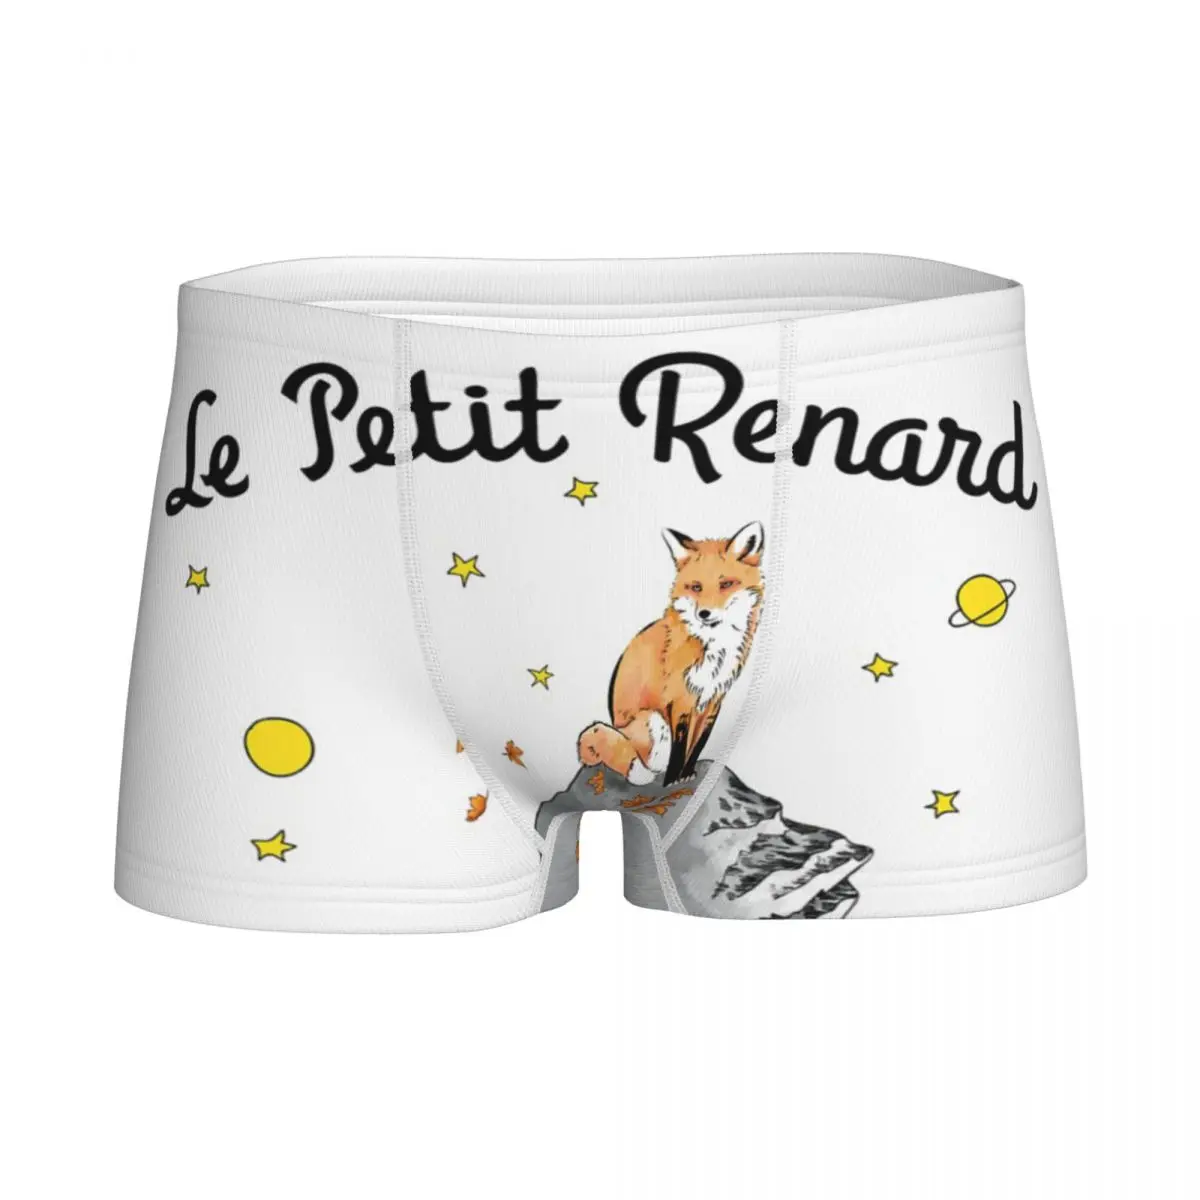 

Children's Boys Underwear Young Shorts Boxers The Little Prince Le Petit Prince Fox Rose France Stars Teenage Cotton Underpants